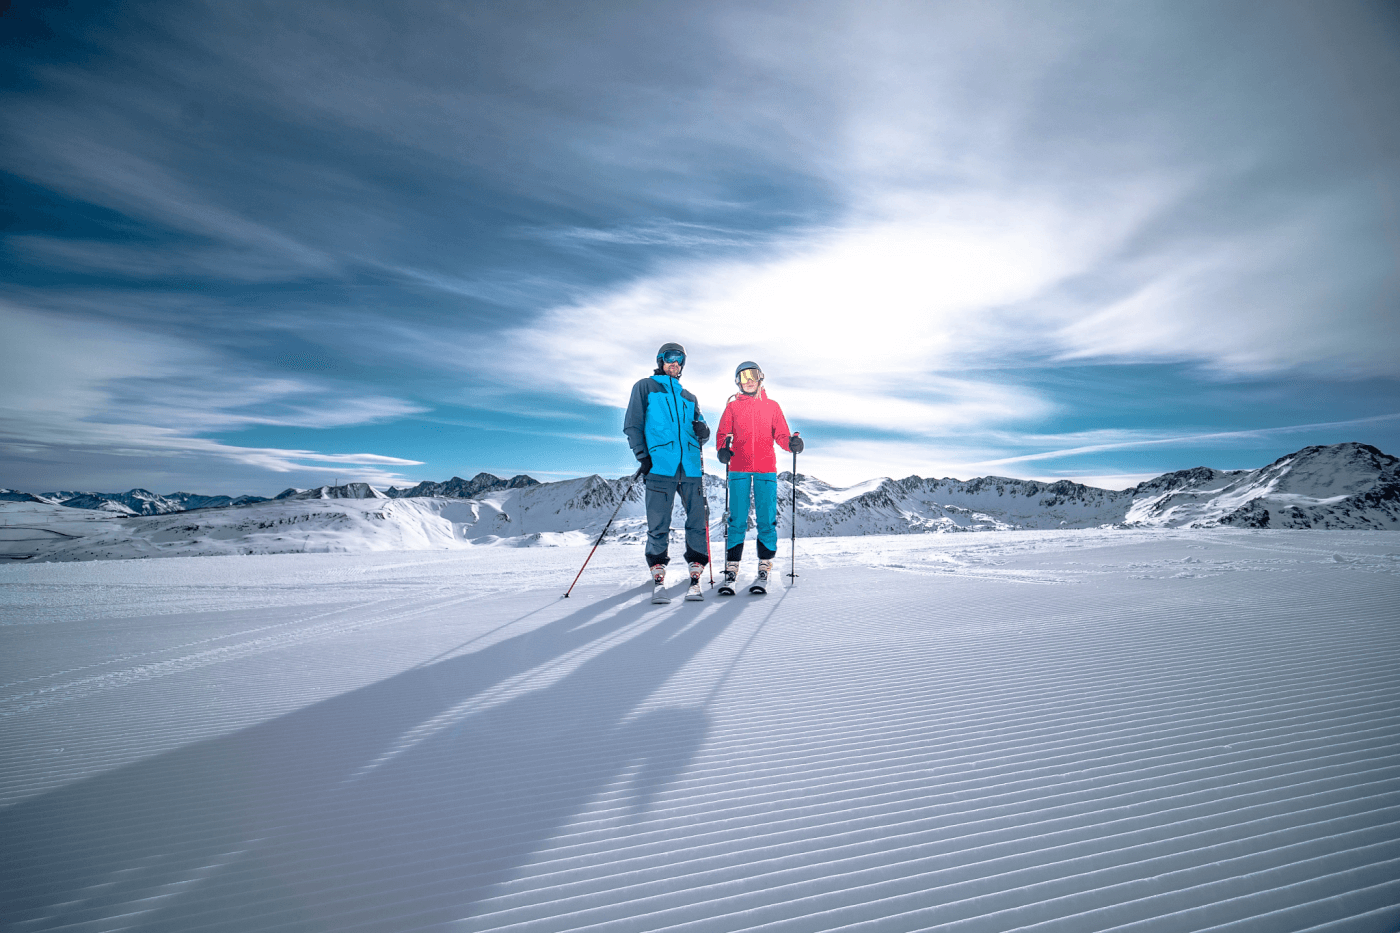 Two people skiing with shadows showing on the snow.